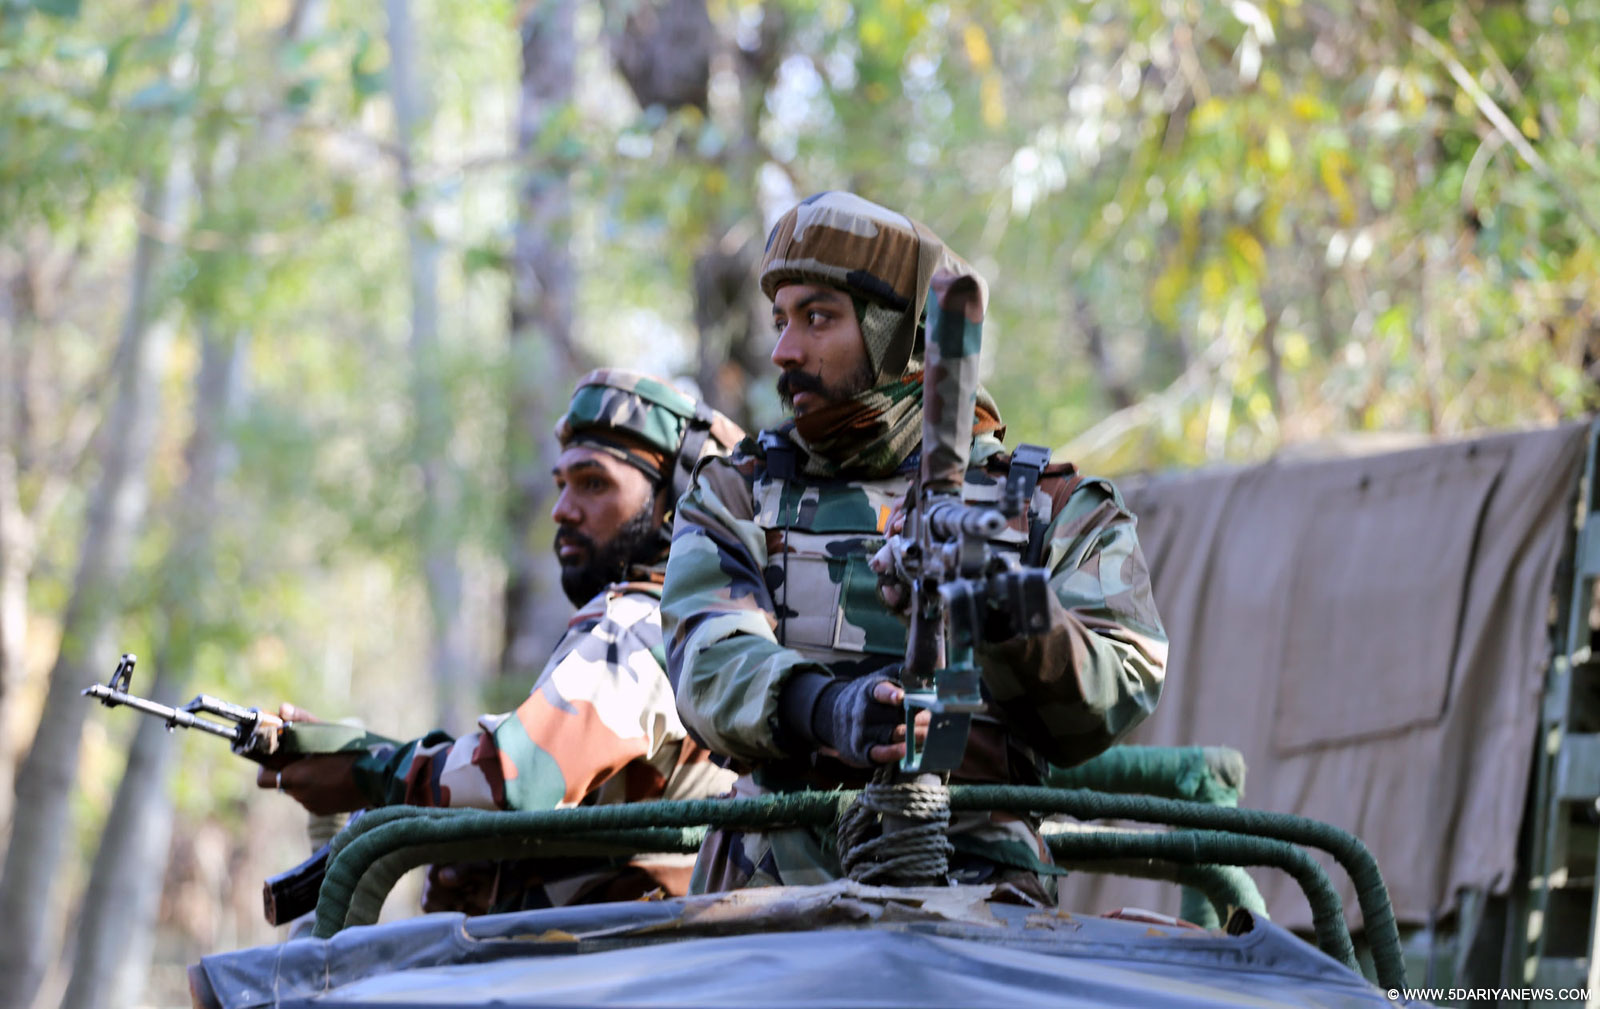 Soldiers take position during an encounter with militants in Bongam village of Jammu and Kashmir